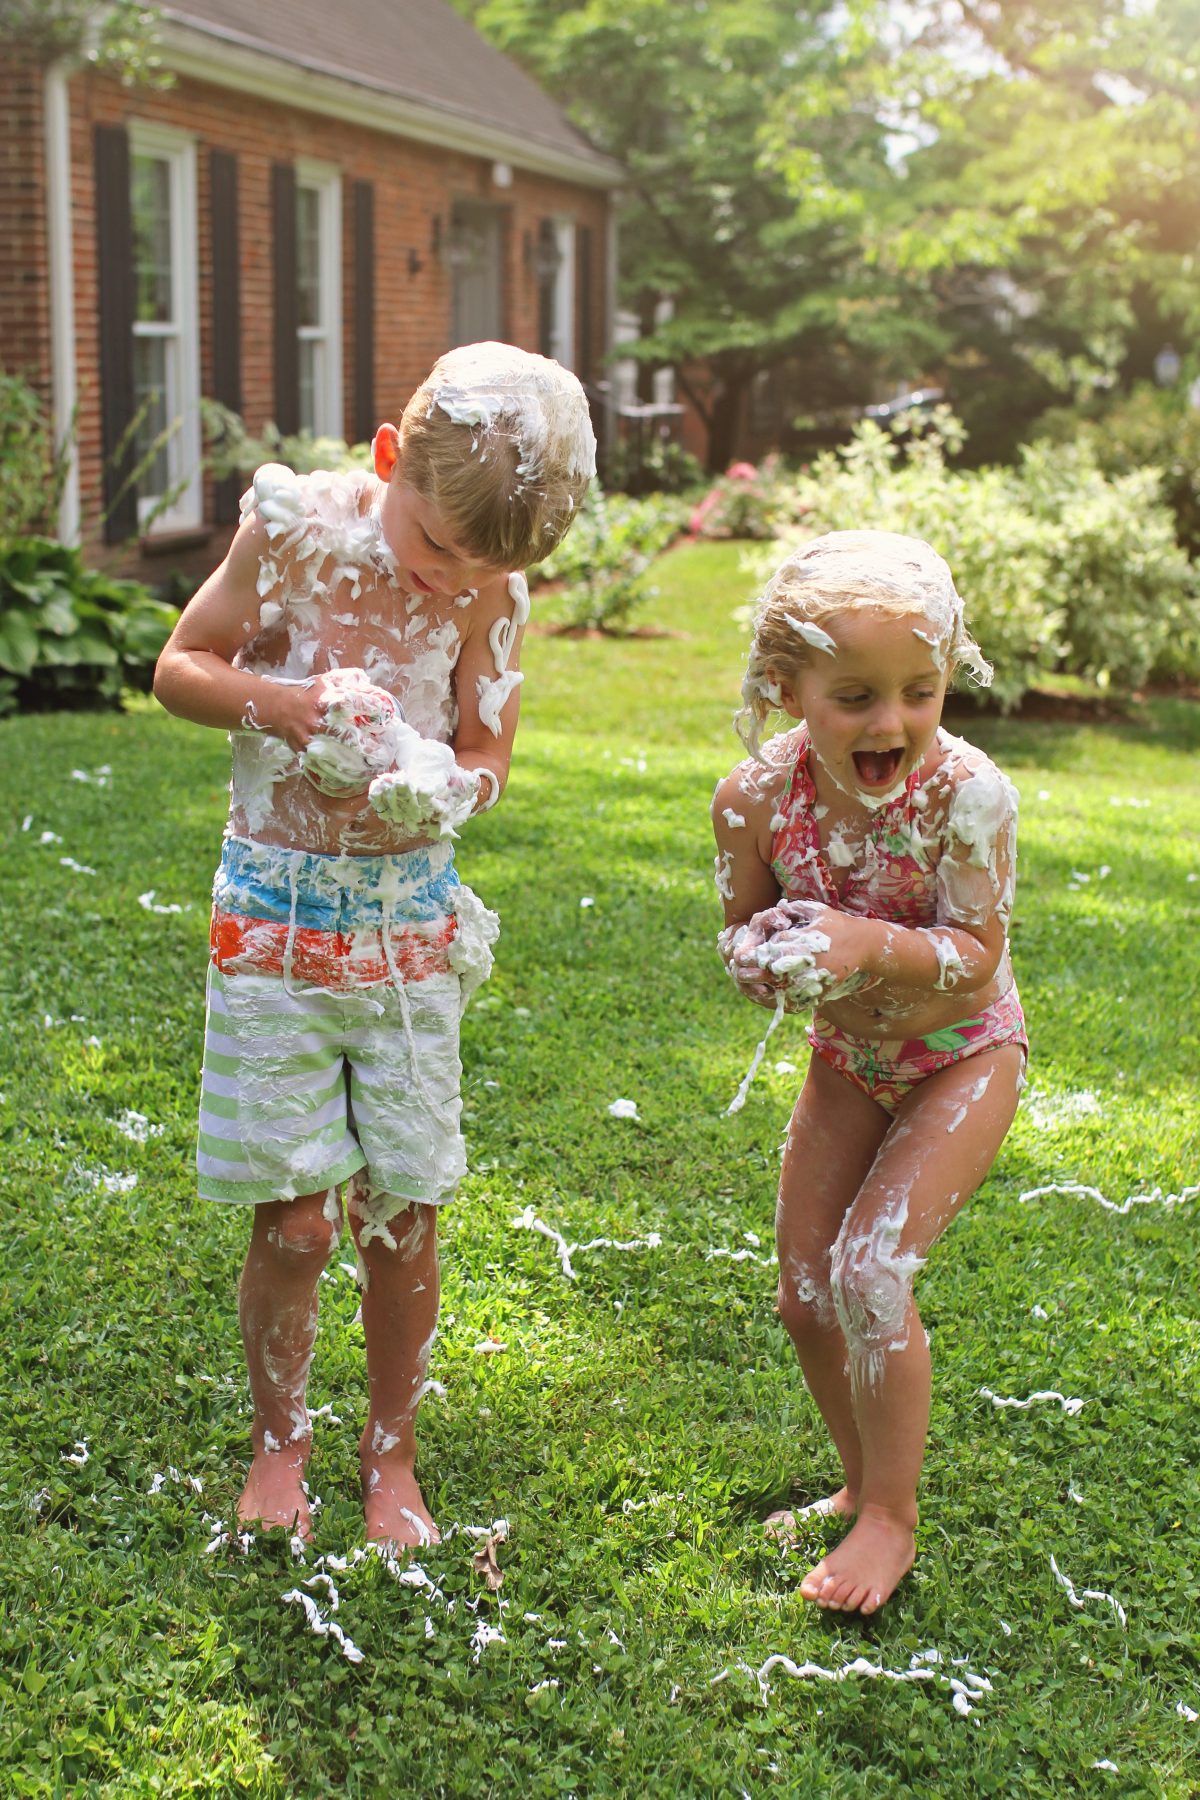 outdoor summertime games and activities for kids